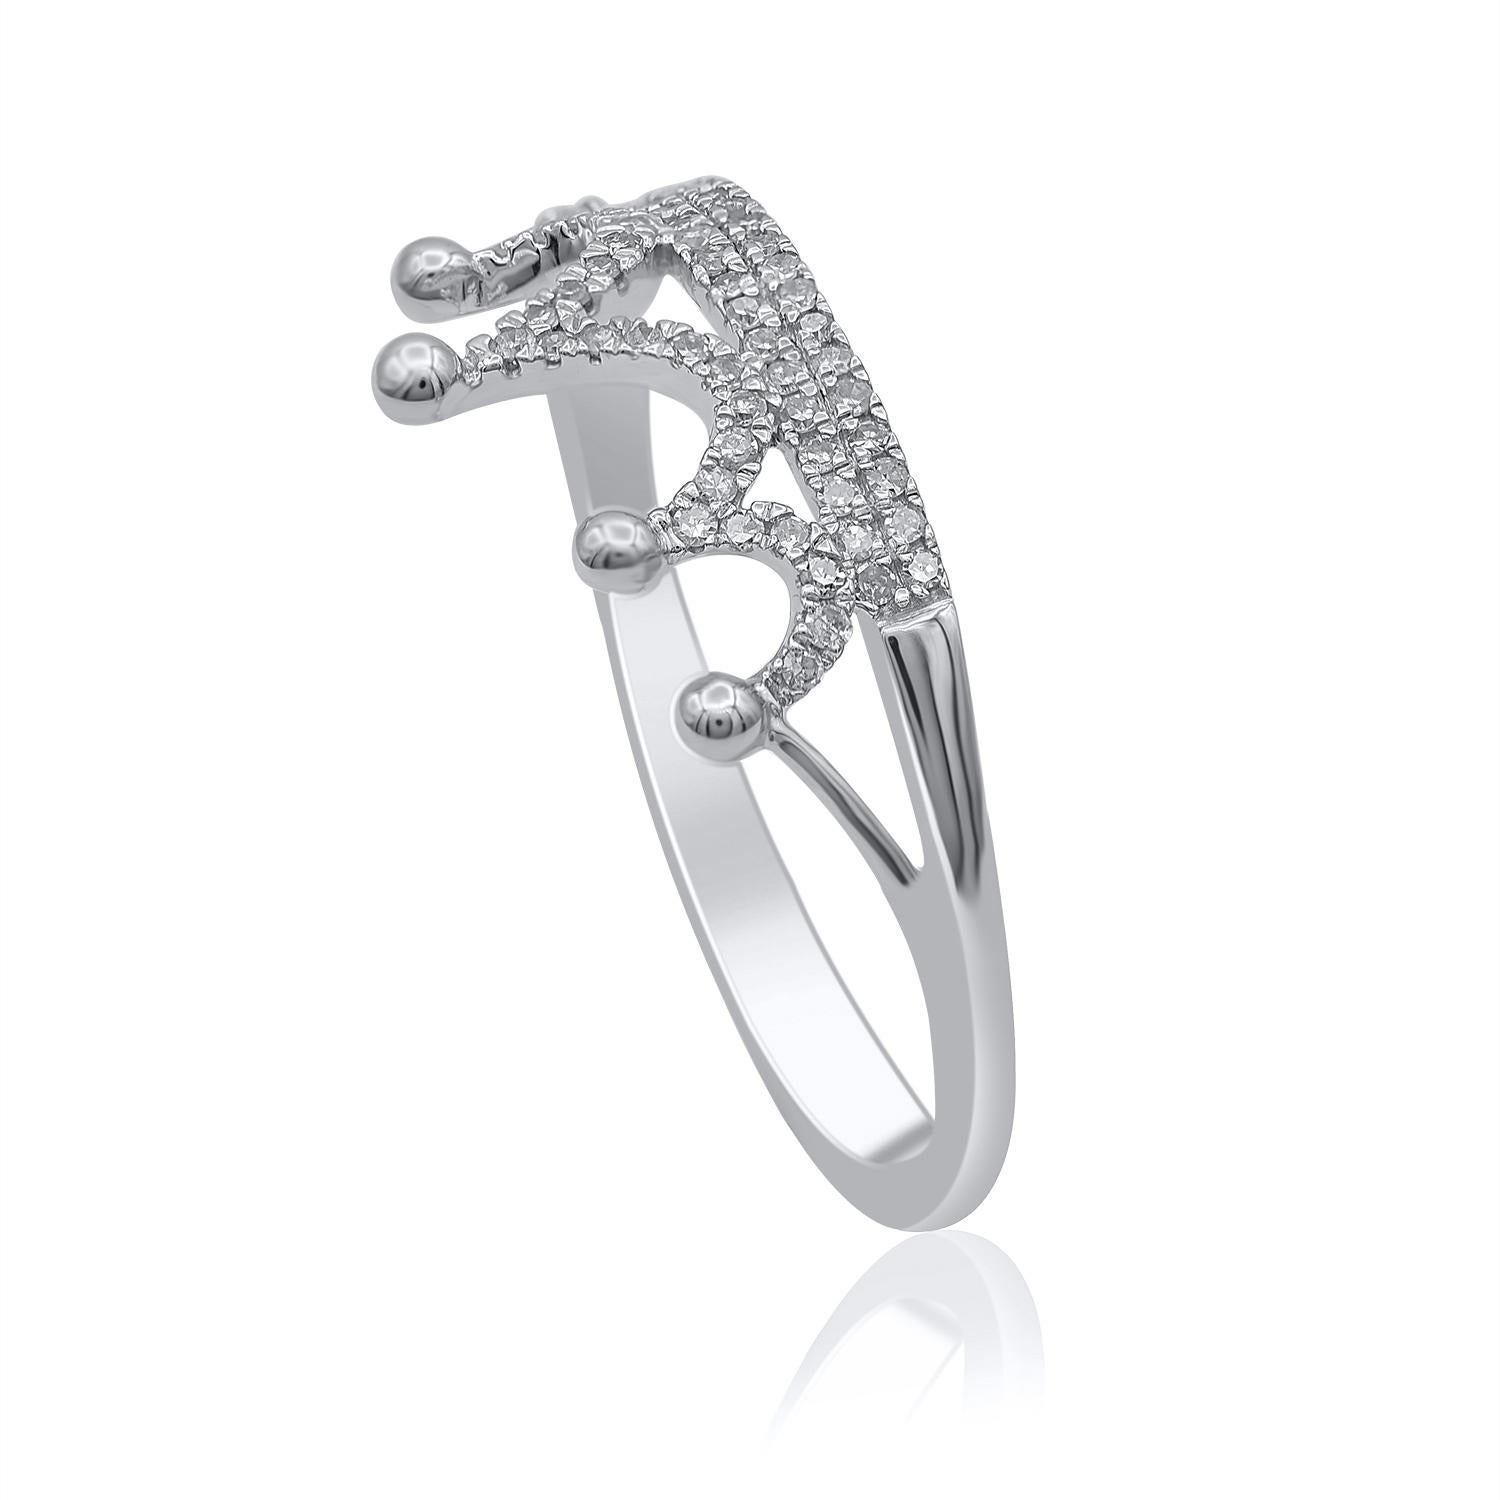 On that special day, express all your love with this elegant and dazzling diamond ring. This crown ring features a sparkling 21 single cut round diamonds beautifully set in prong setting. The total diamond weight is 0.15 Carat. The diamonds are